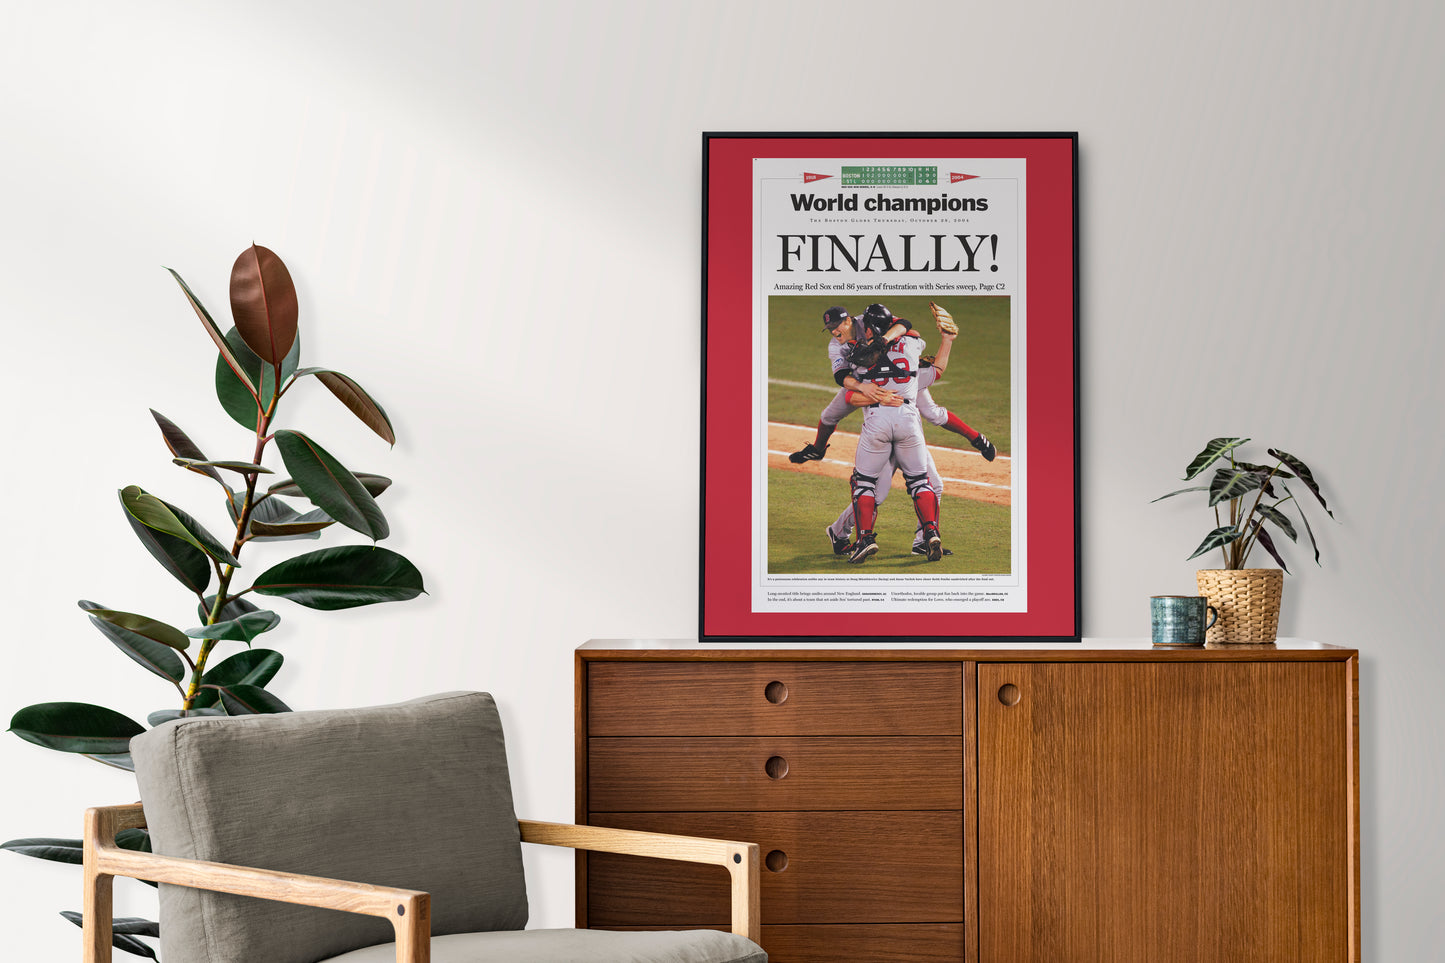 Boston Red Sox 2004 World Series MLB Champions Front Cover The Boston Globe Newspaper Poster